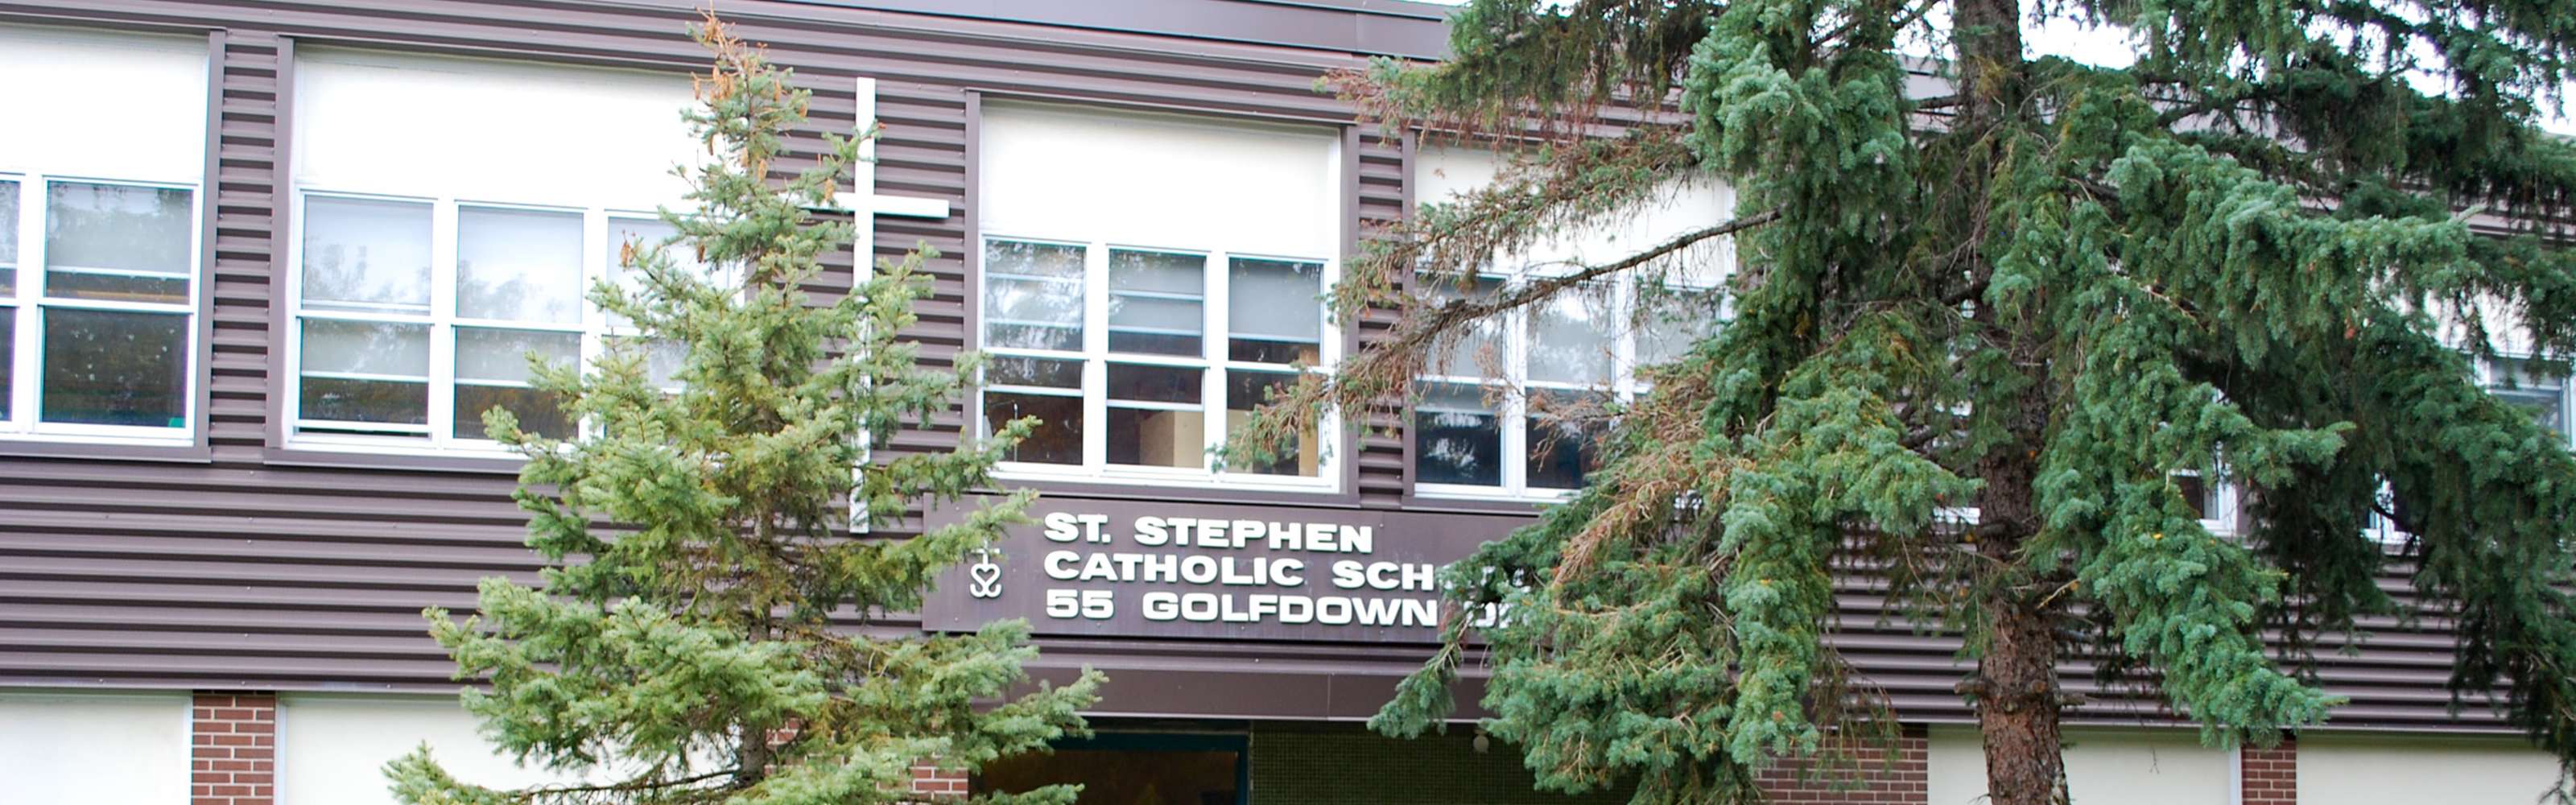 The front of the St. Stephen Catholic School building.